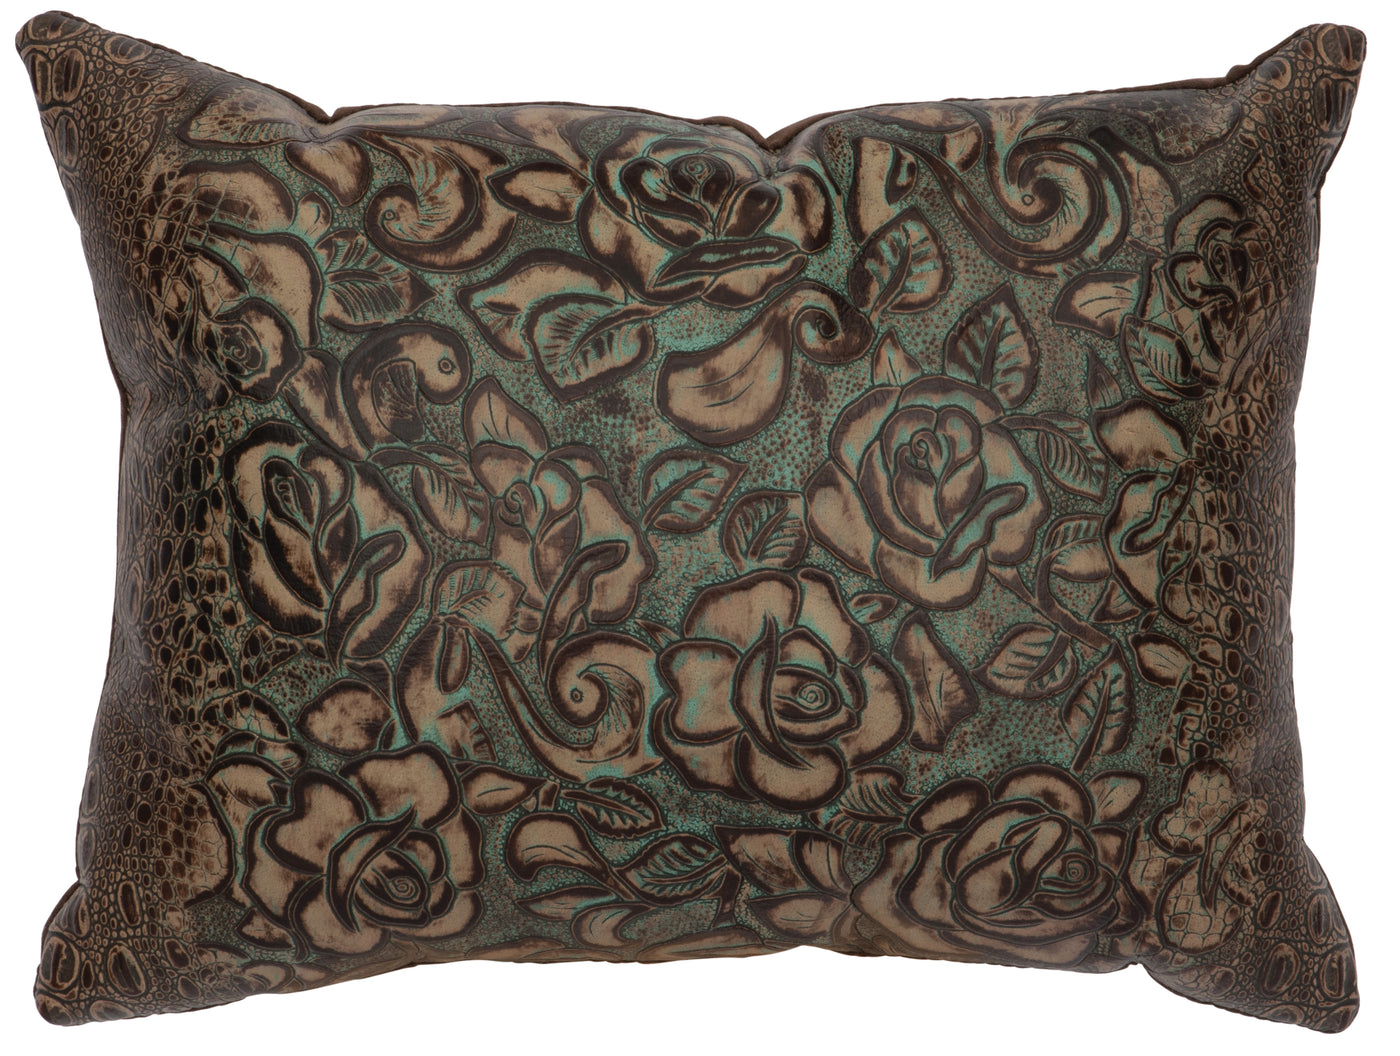 Canvello Sundance Leather Pillow - Leather Back - 16" x 16"